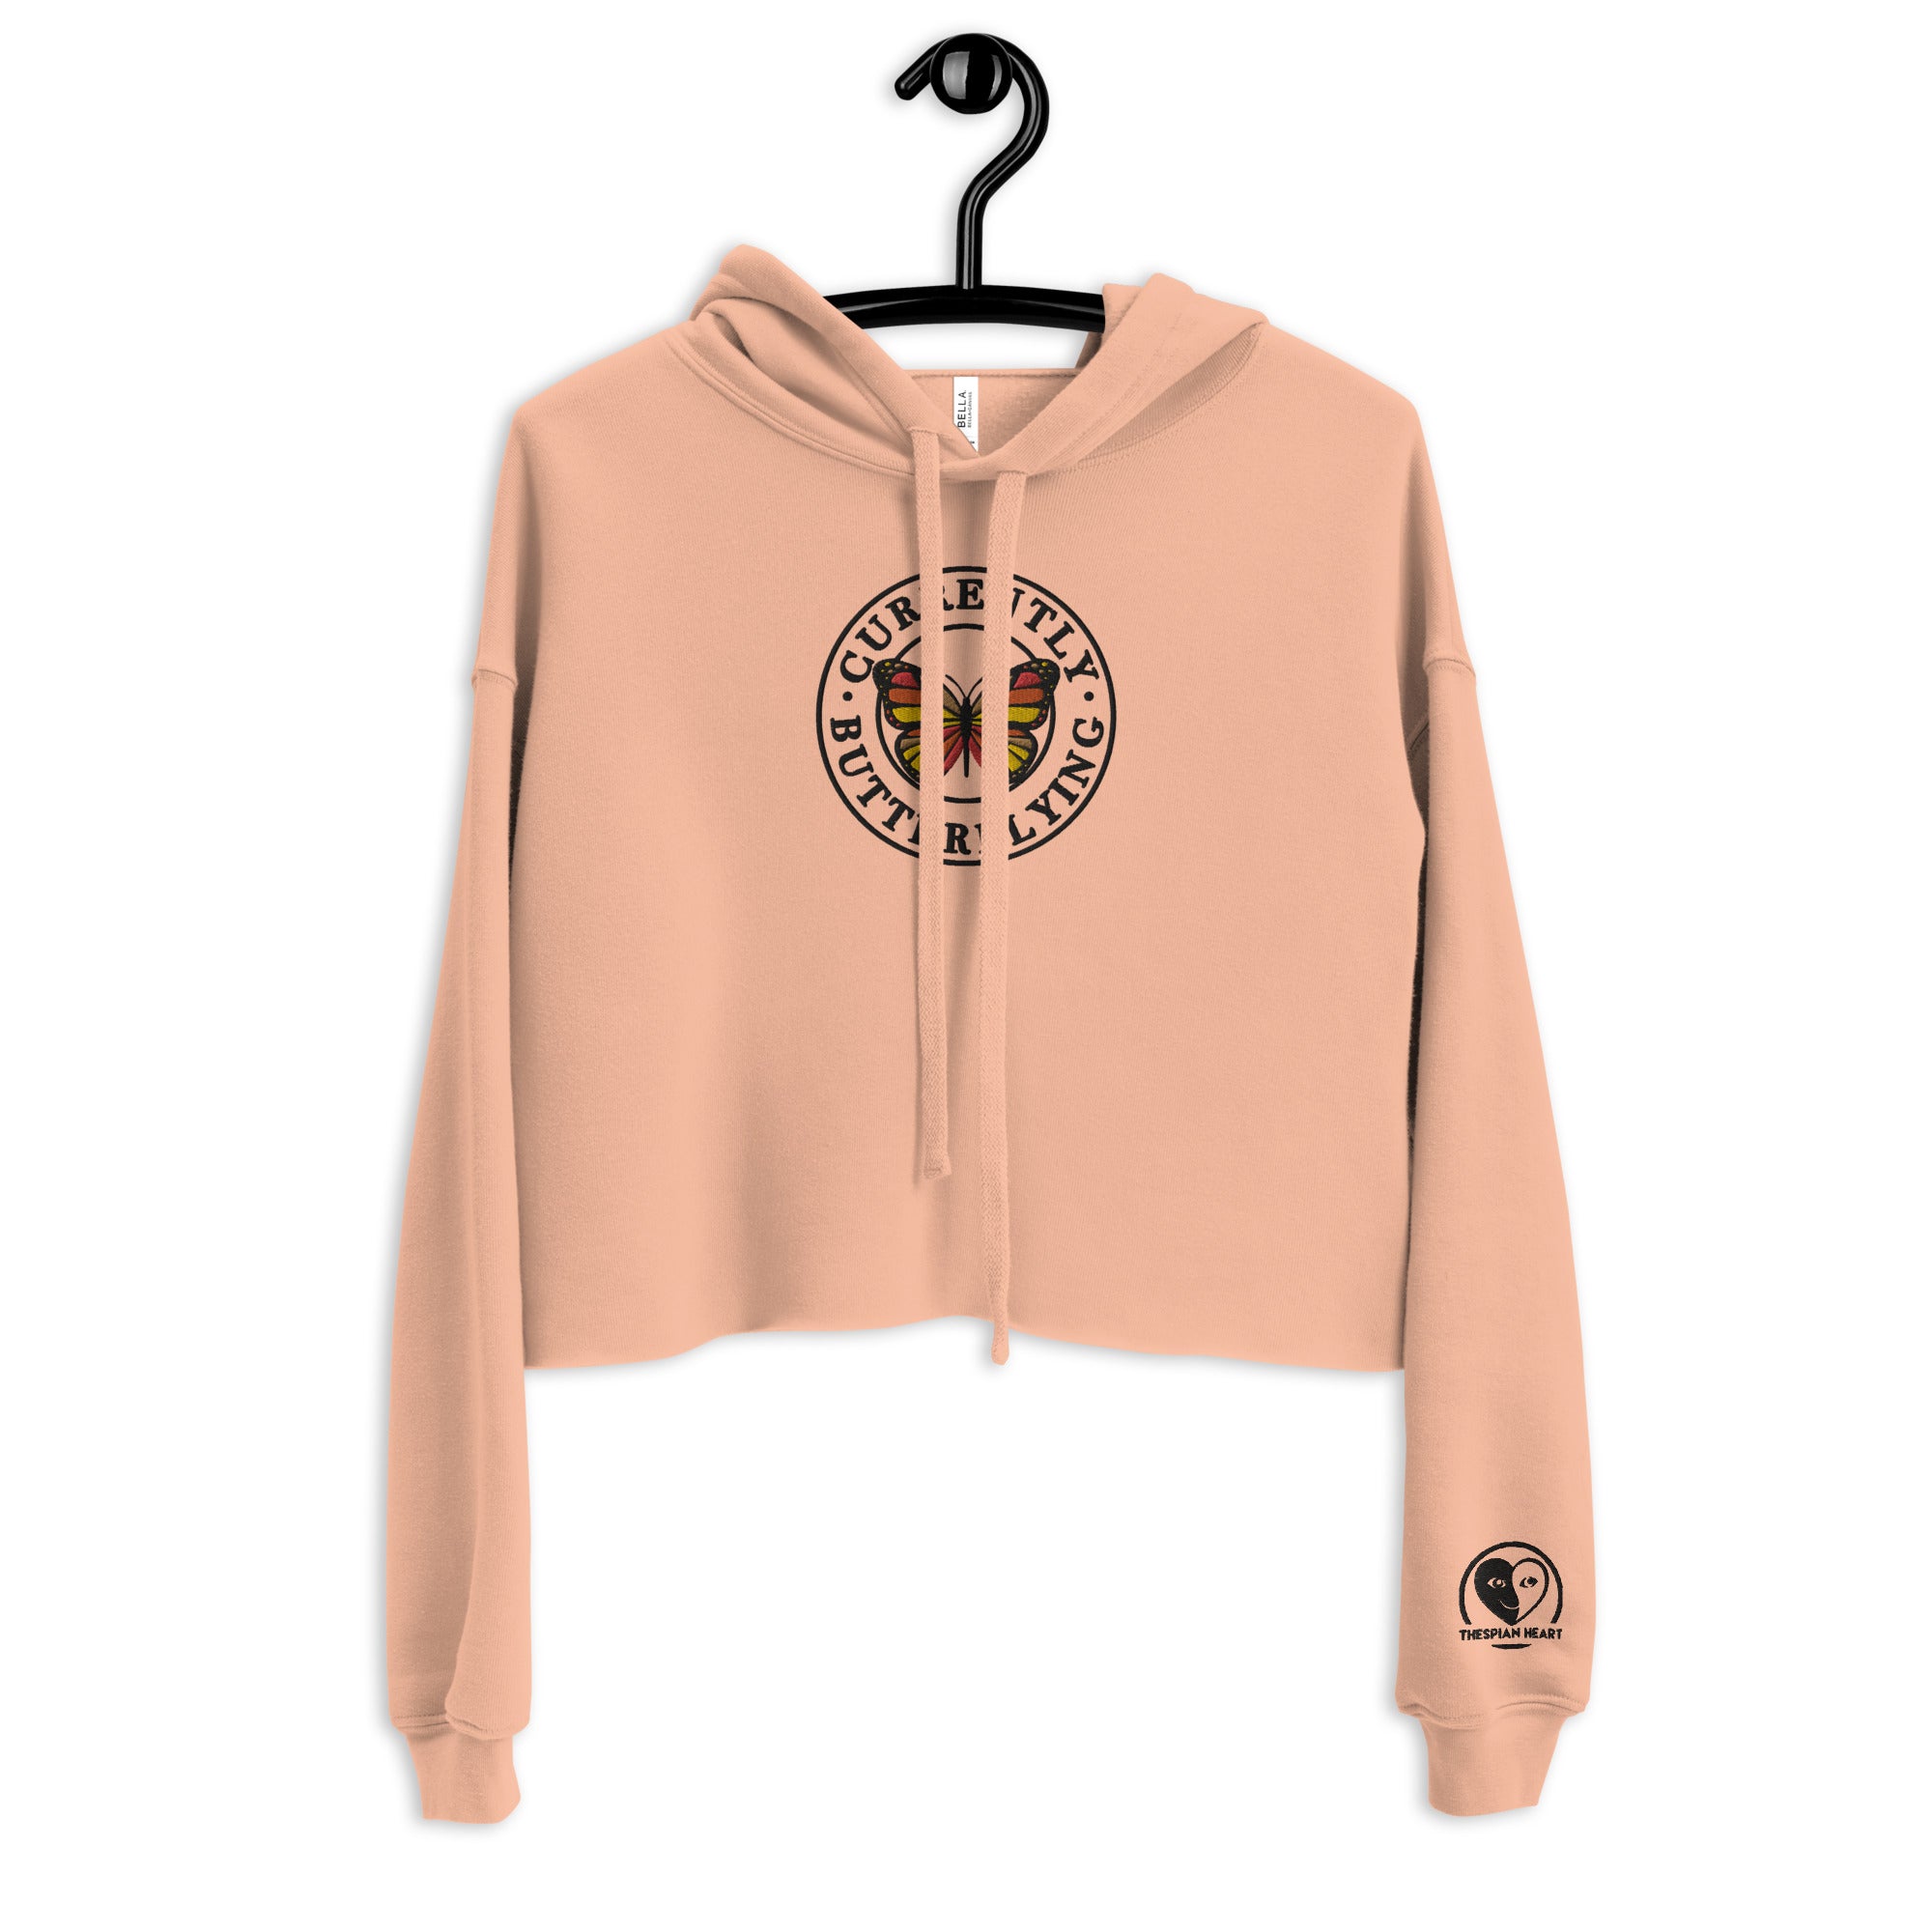 Currently Butterflying - Embroidered Crop Top Hoodie